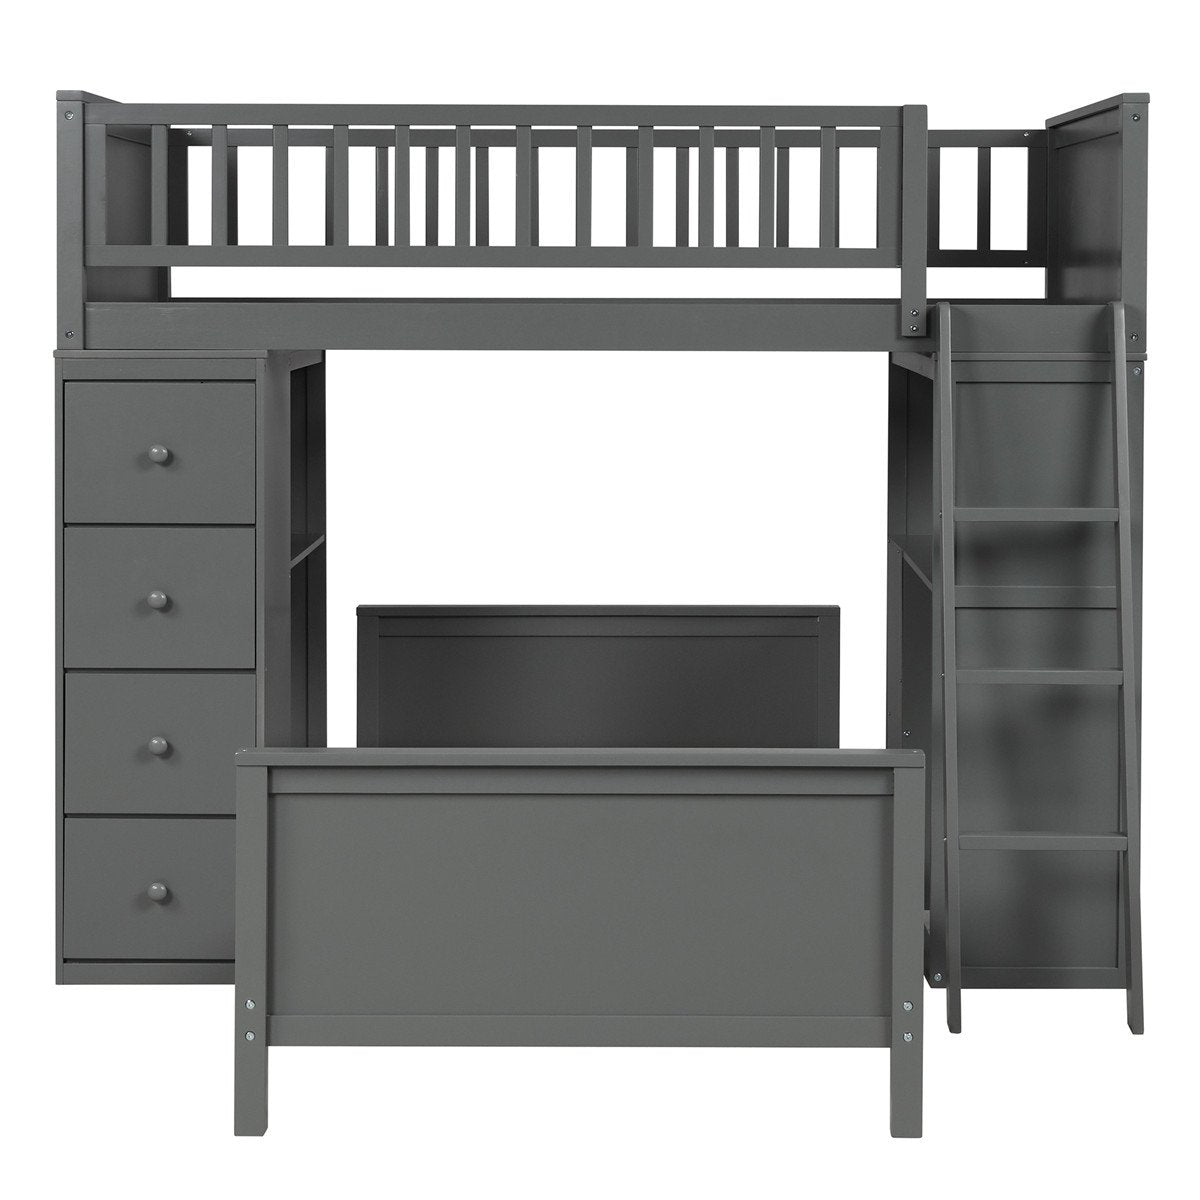 Twin Over Twin Bed with Drawers and Shelves